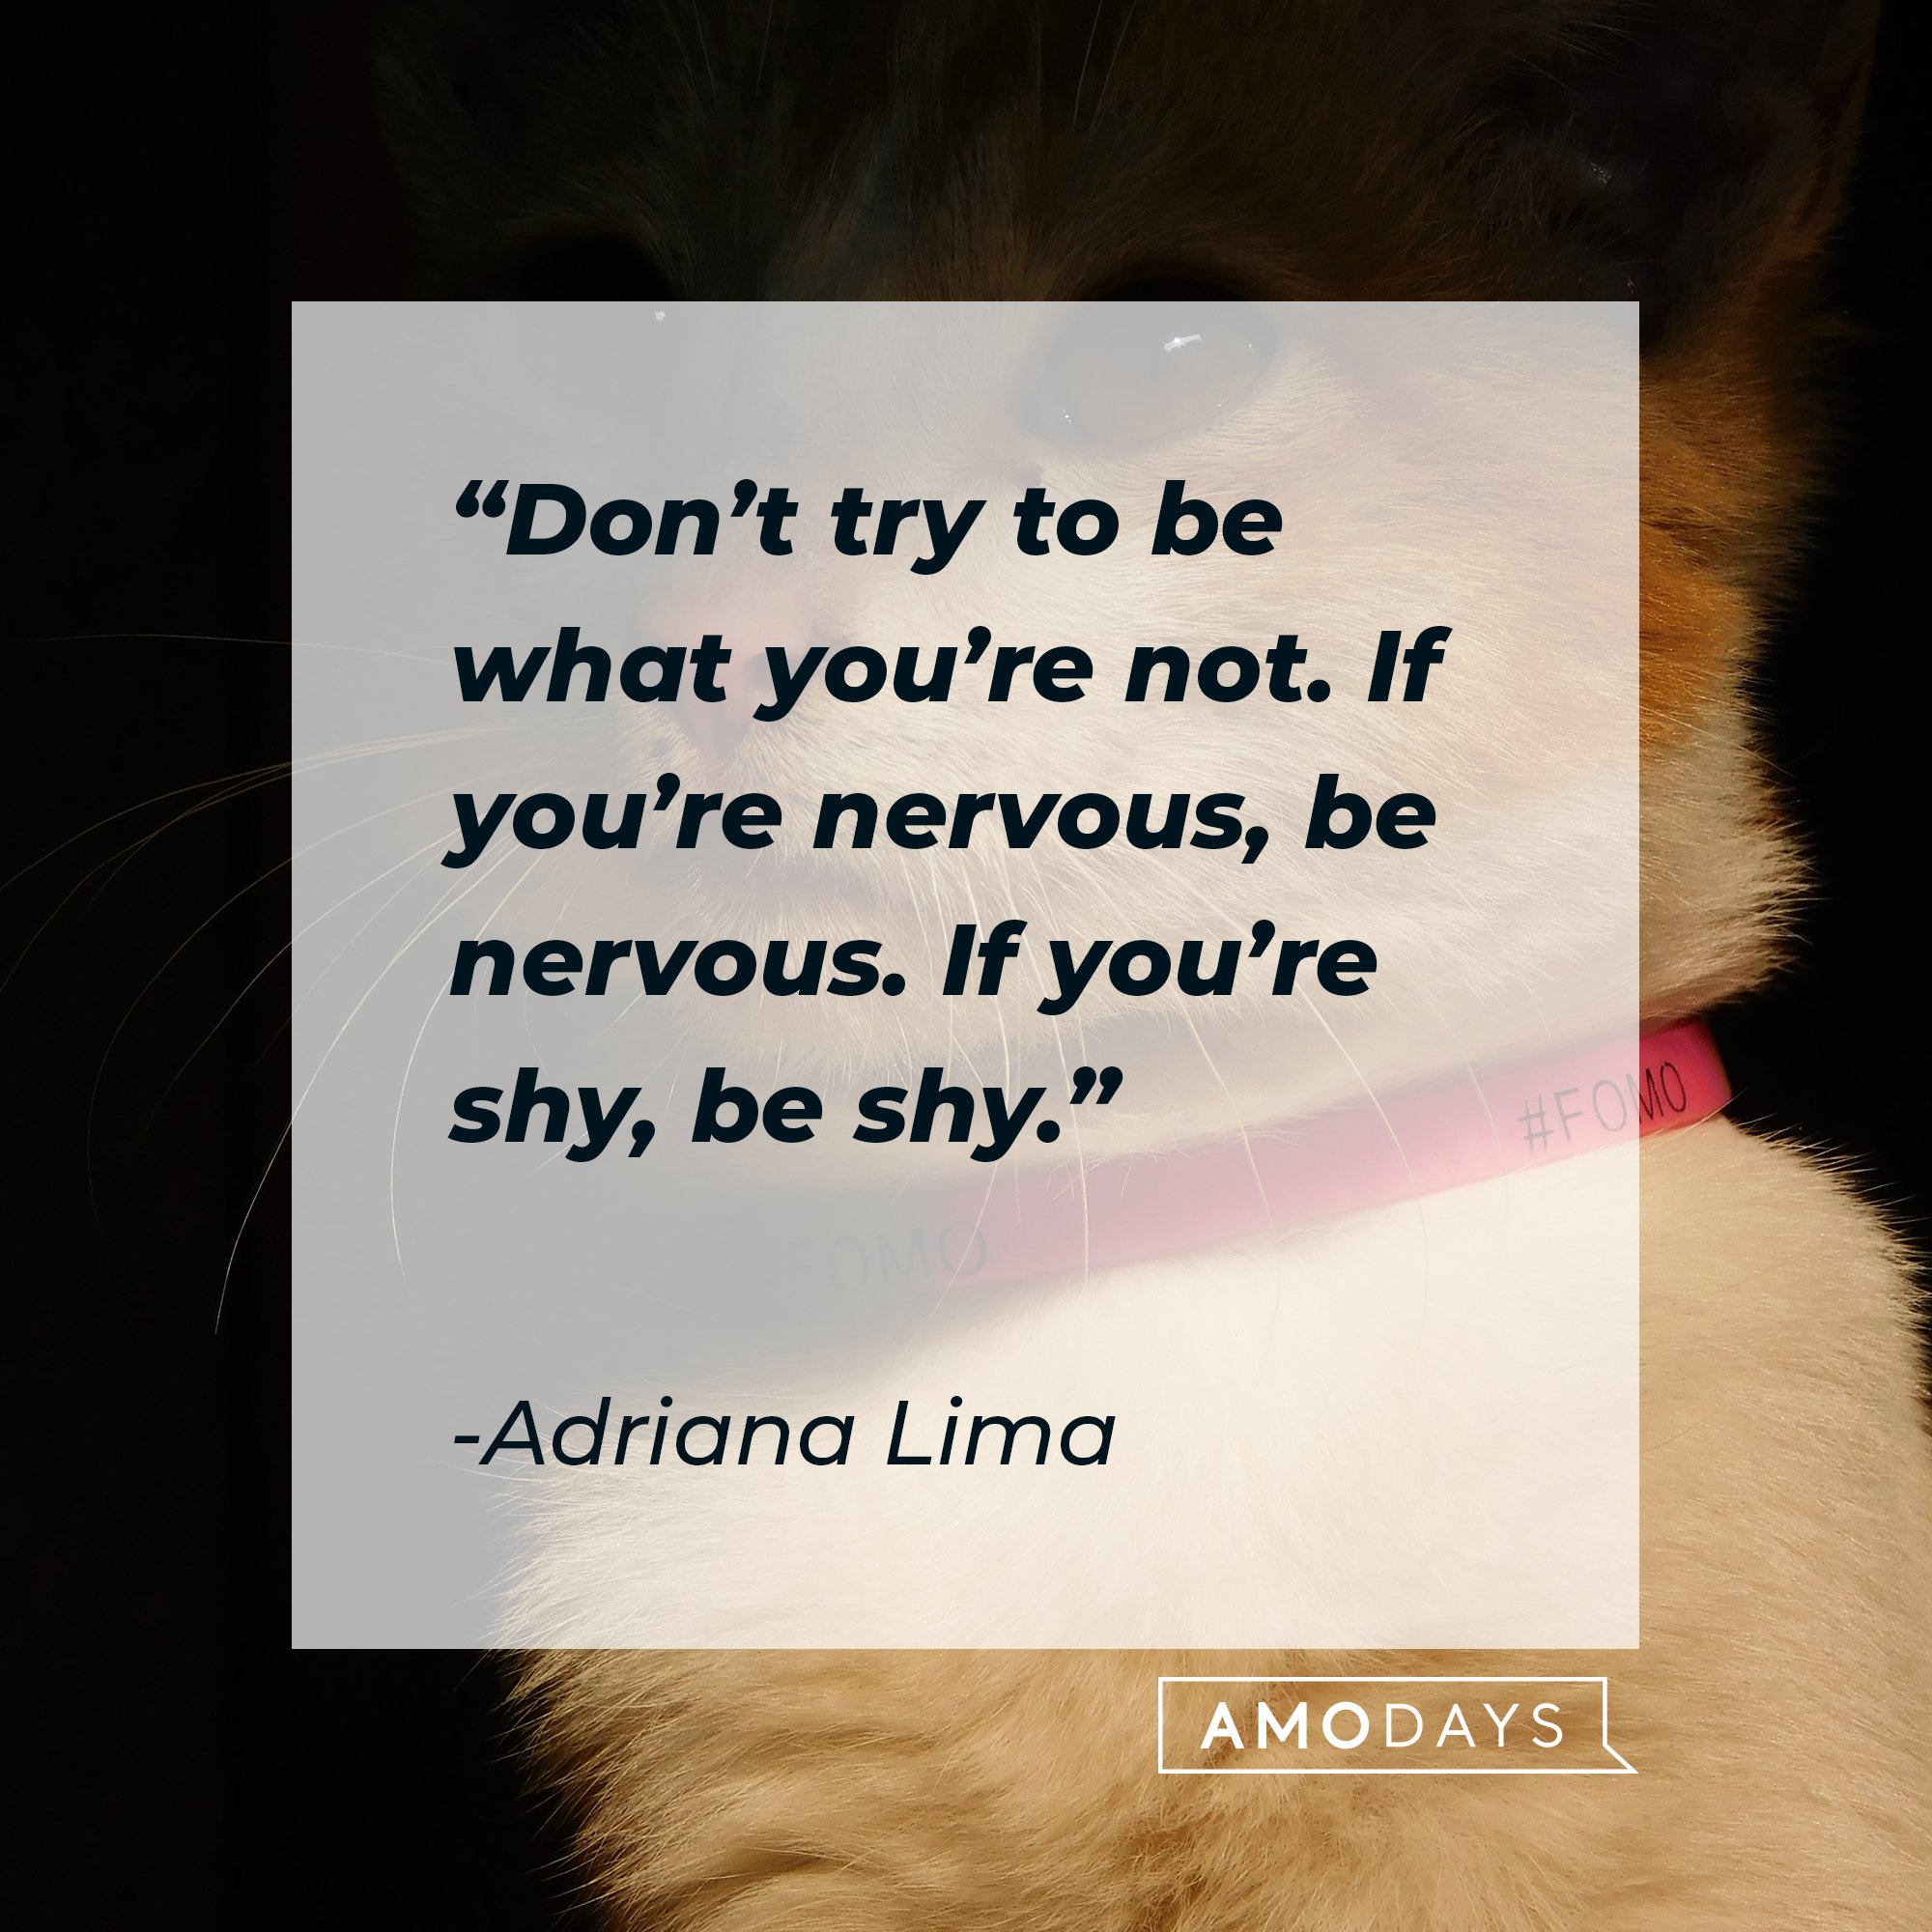 Adriana Lima's quote: “Don’t try to be what you’re not. If you’re nervous, be nervous. If you’re shy, be shy.” | Image: AmoDays